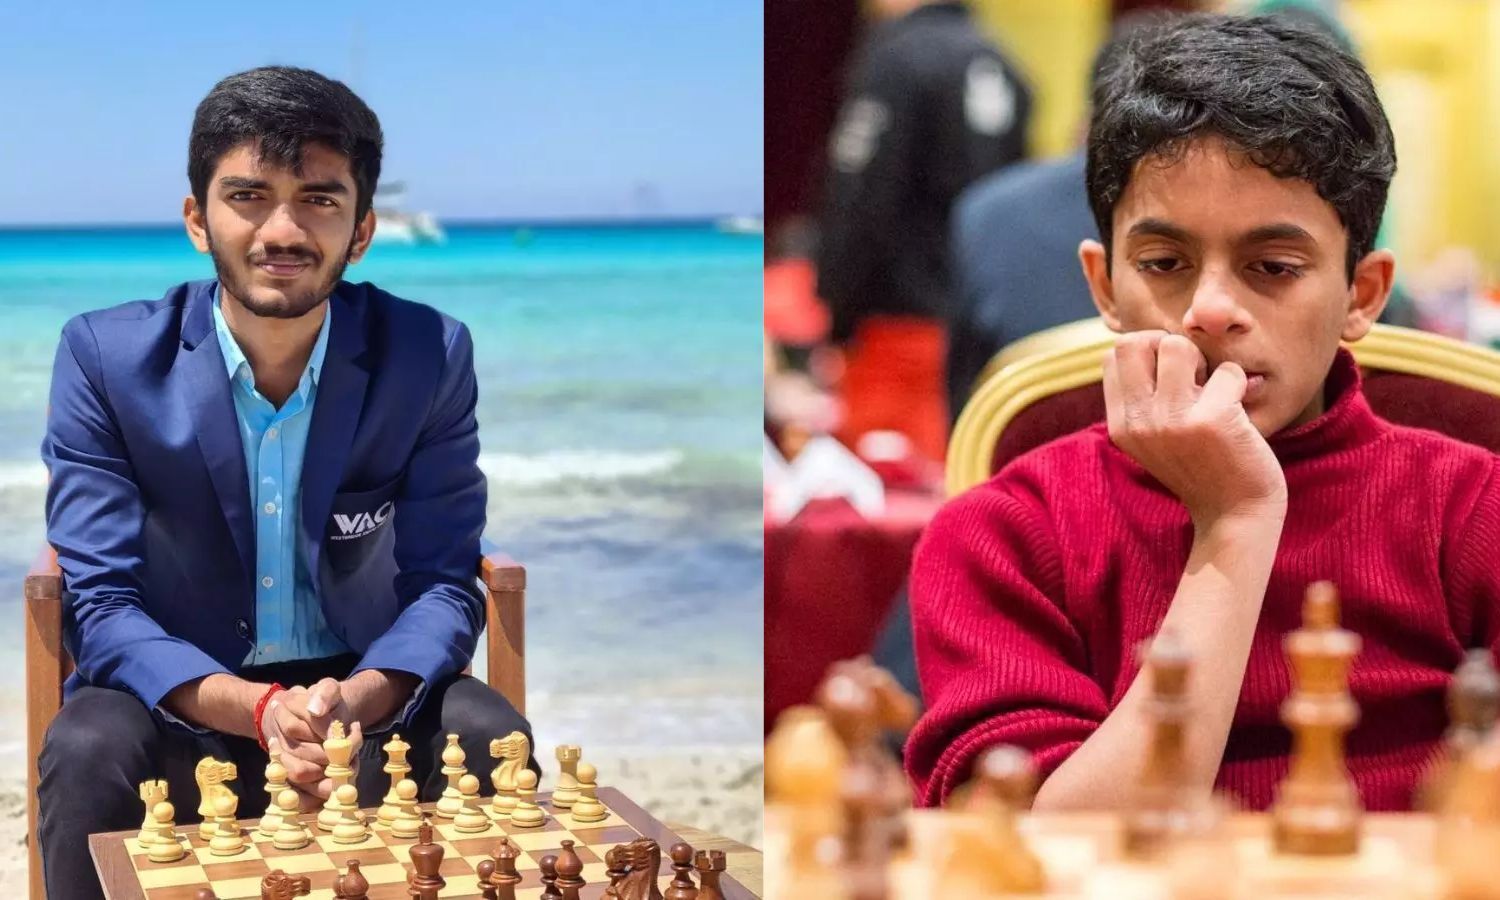 Chess Olympiad Day 8 Highlights: Gukesh makes it 8 wins in 8 games, Hong  Kong player sits in protest outside hall - Sportstar